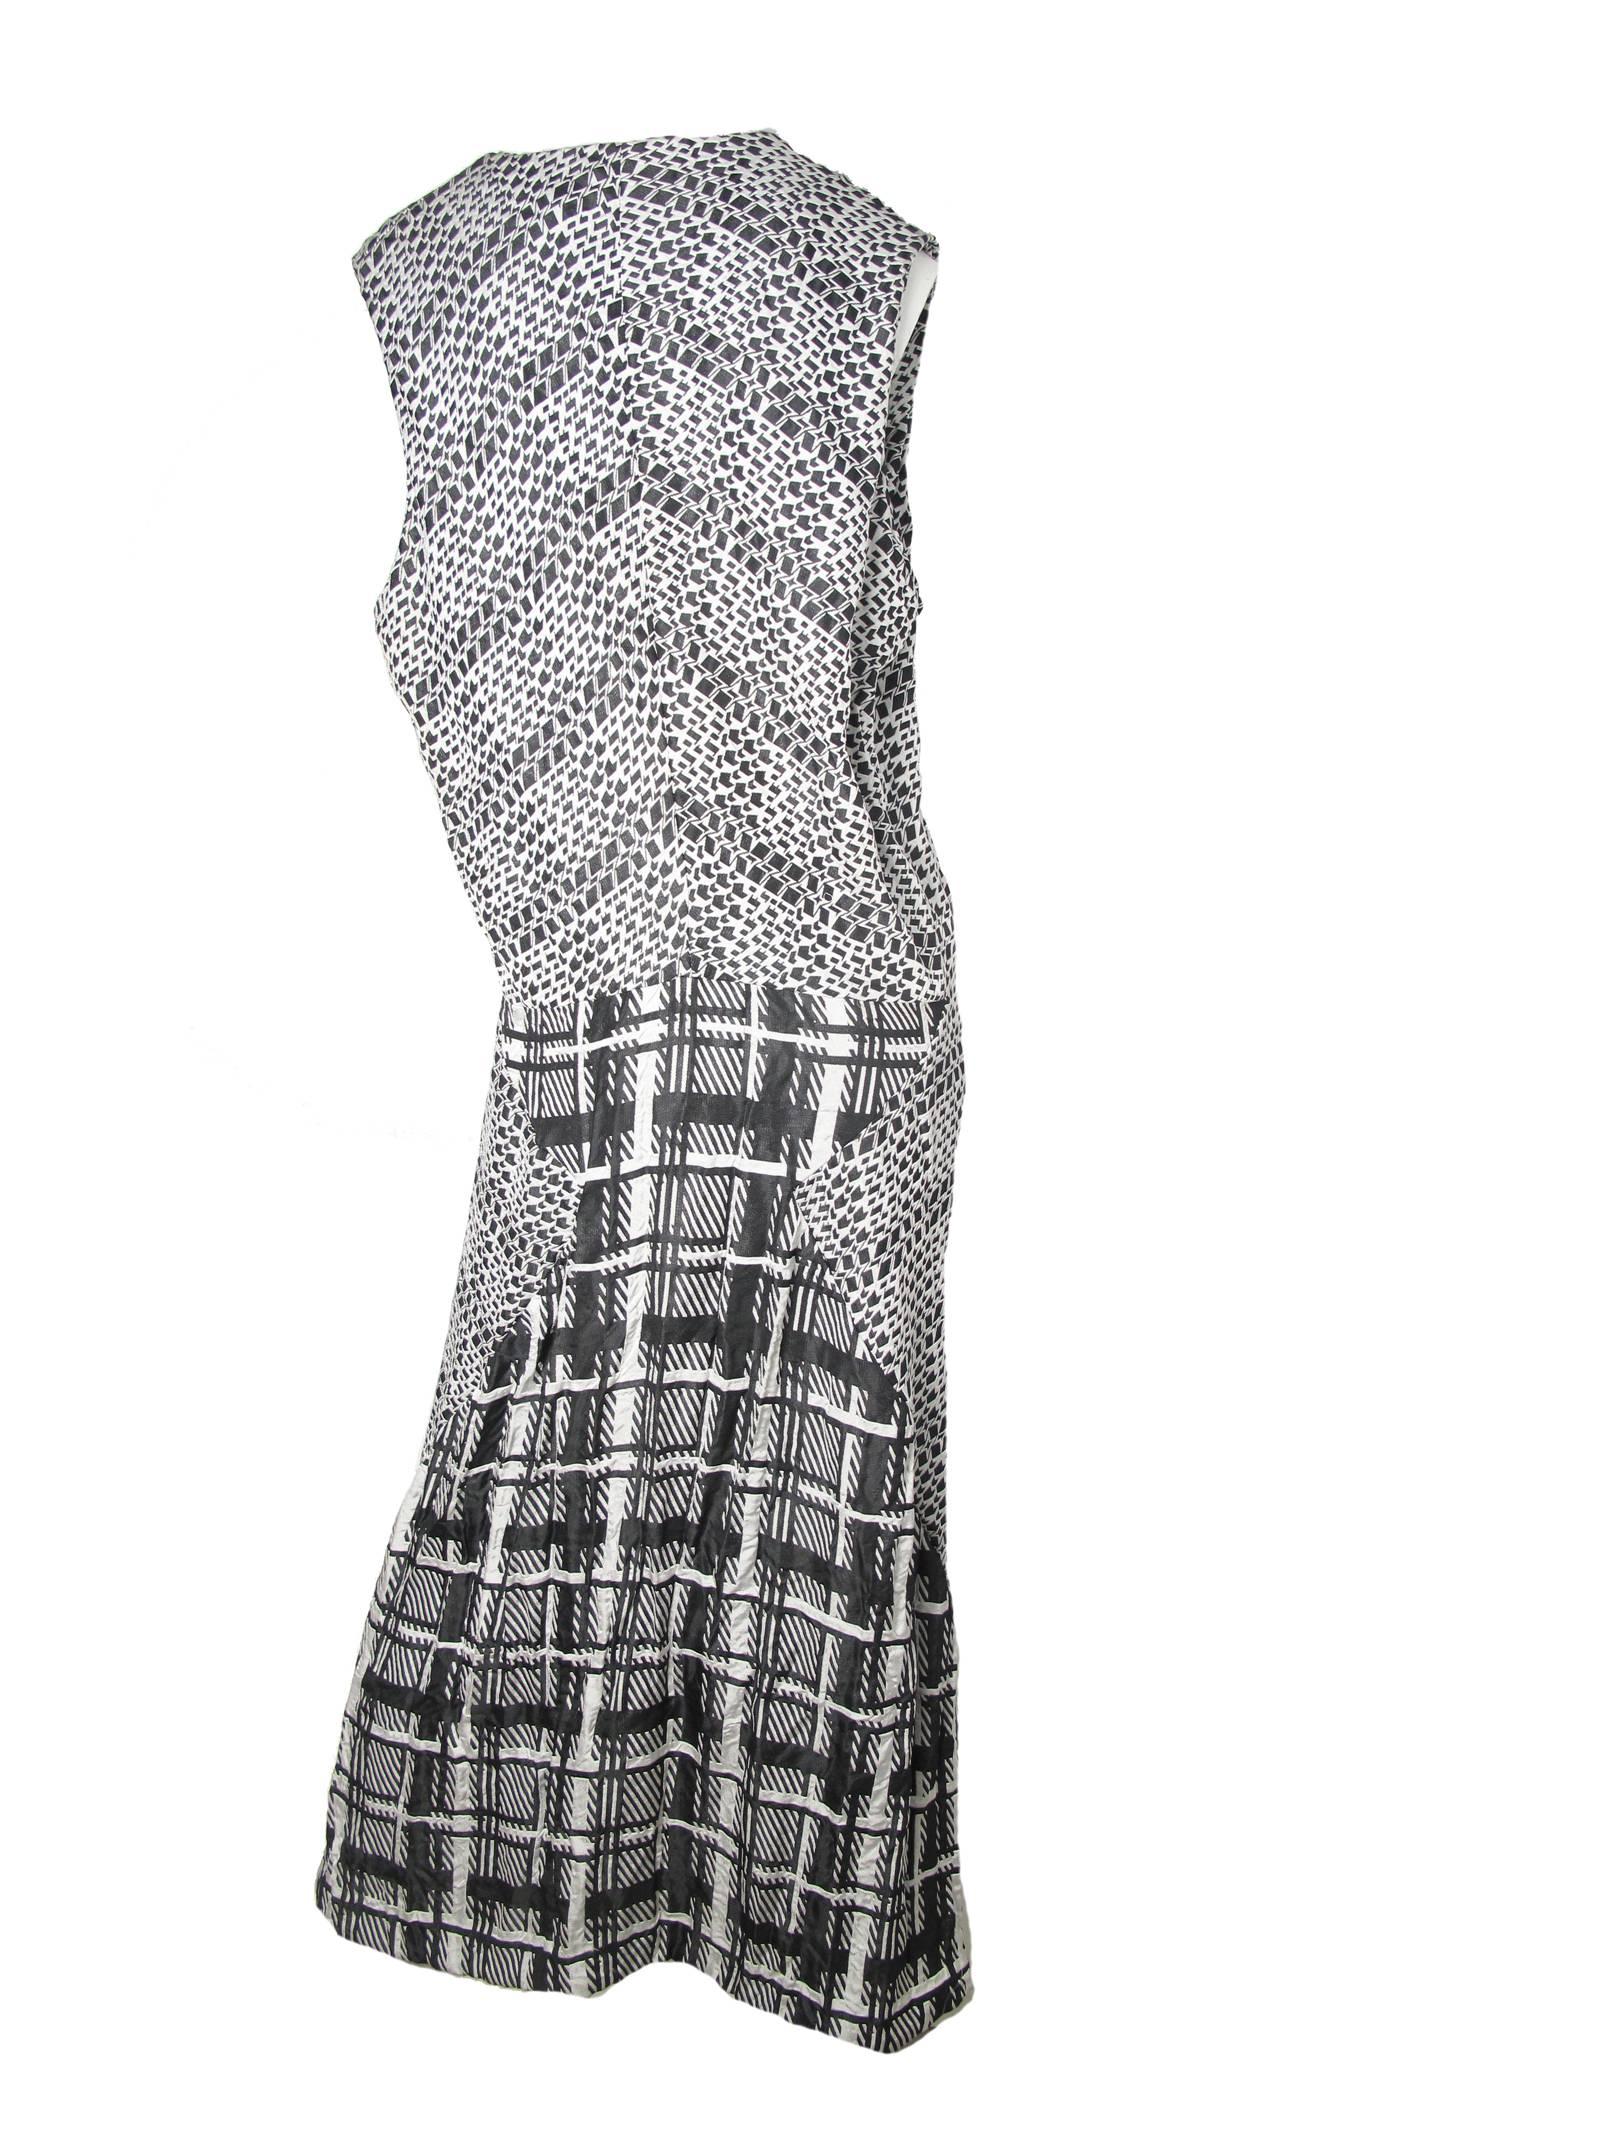 1992 Comme des Garcons arrow / star printed gown, never worn, original tags still attached. 
44